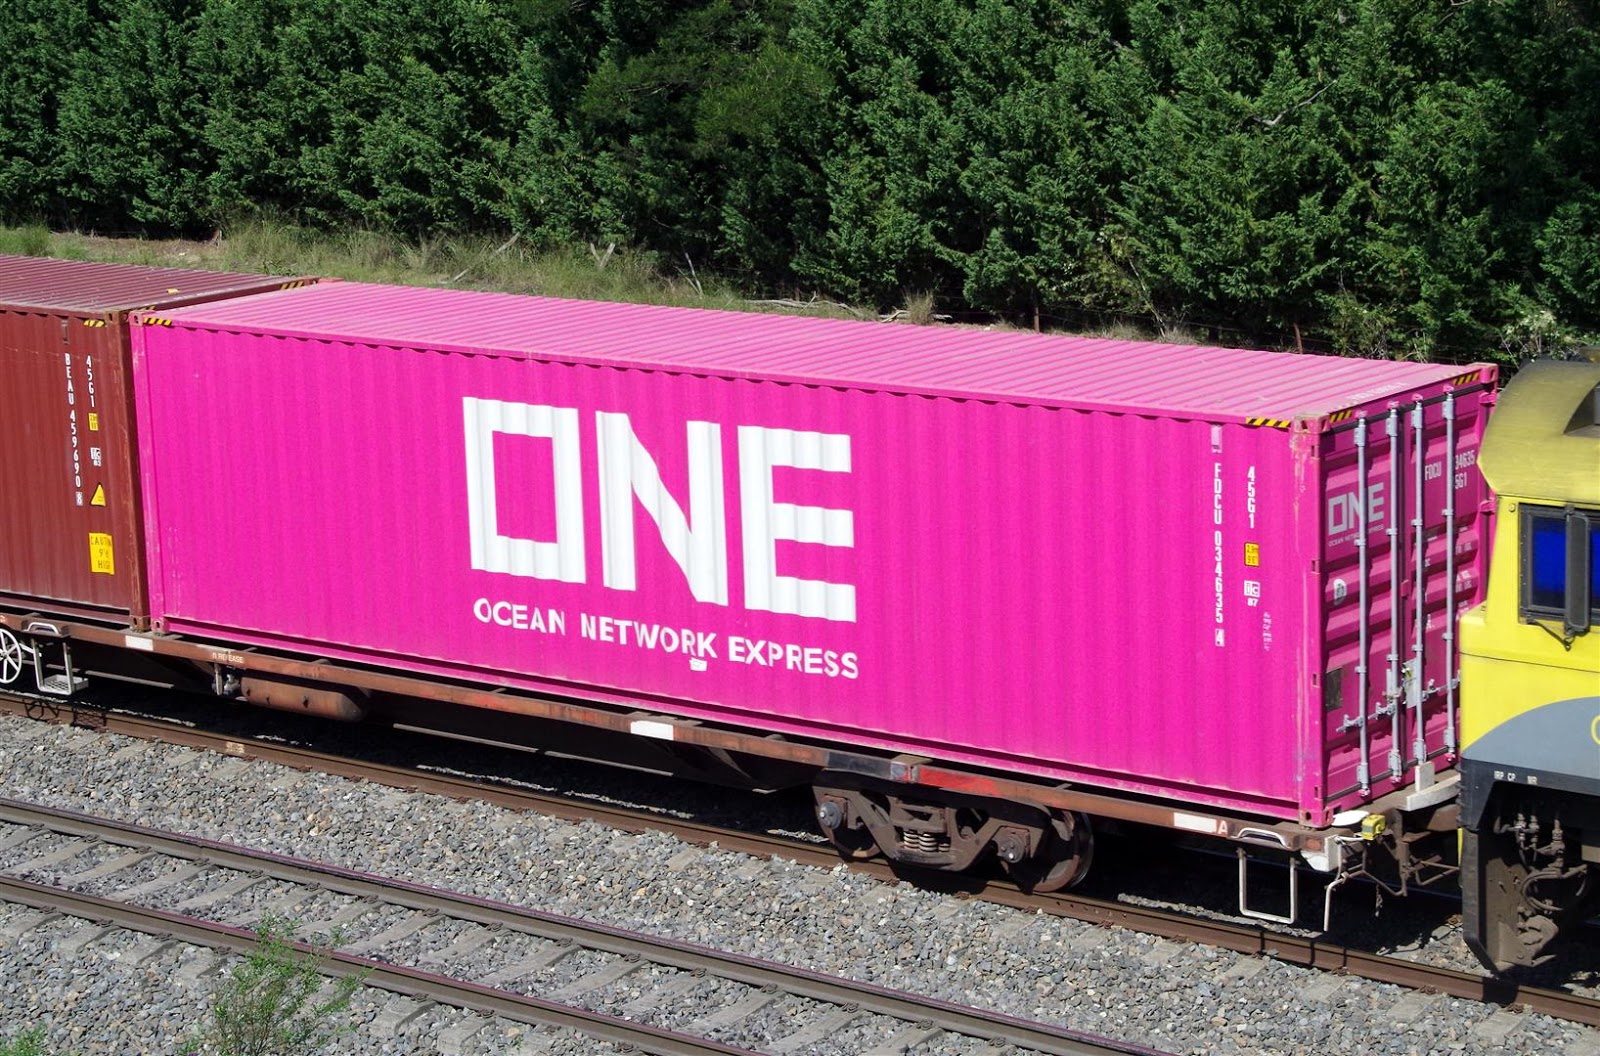 Rollingstock News: The Pink ONE